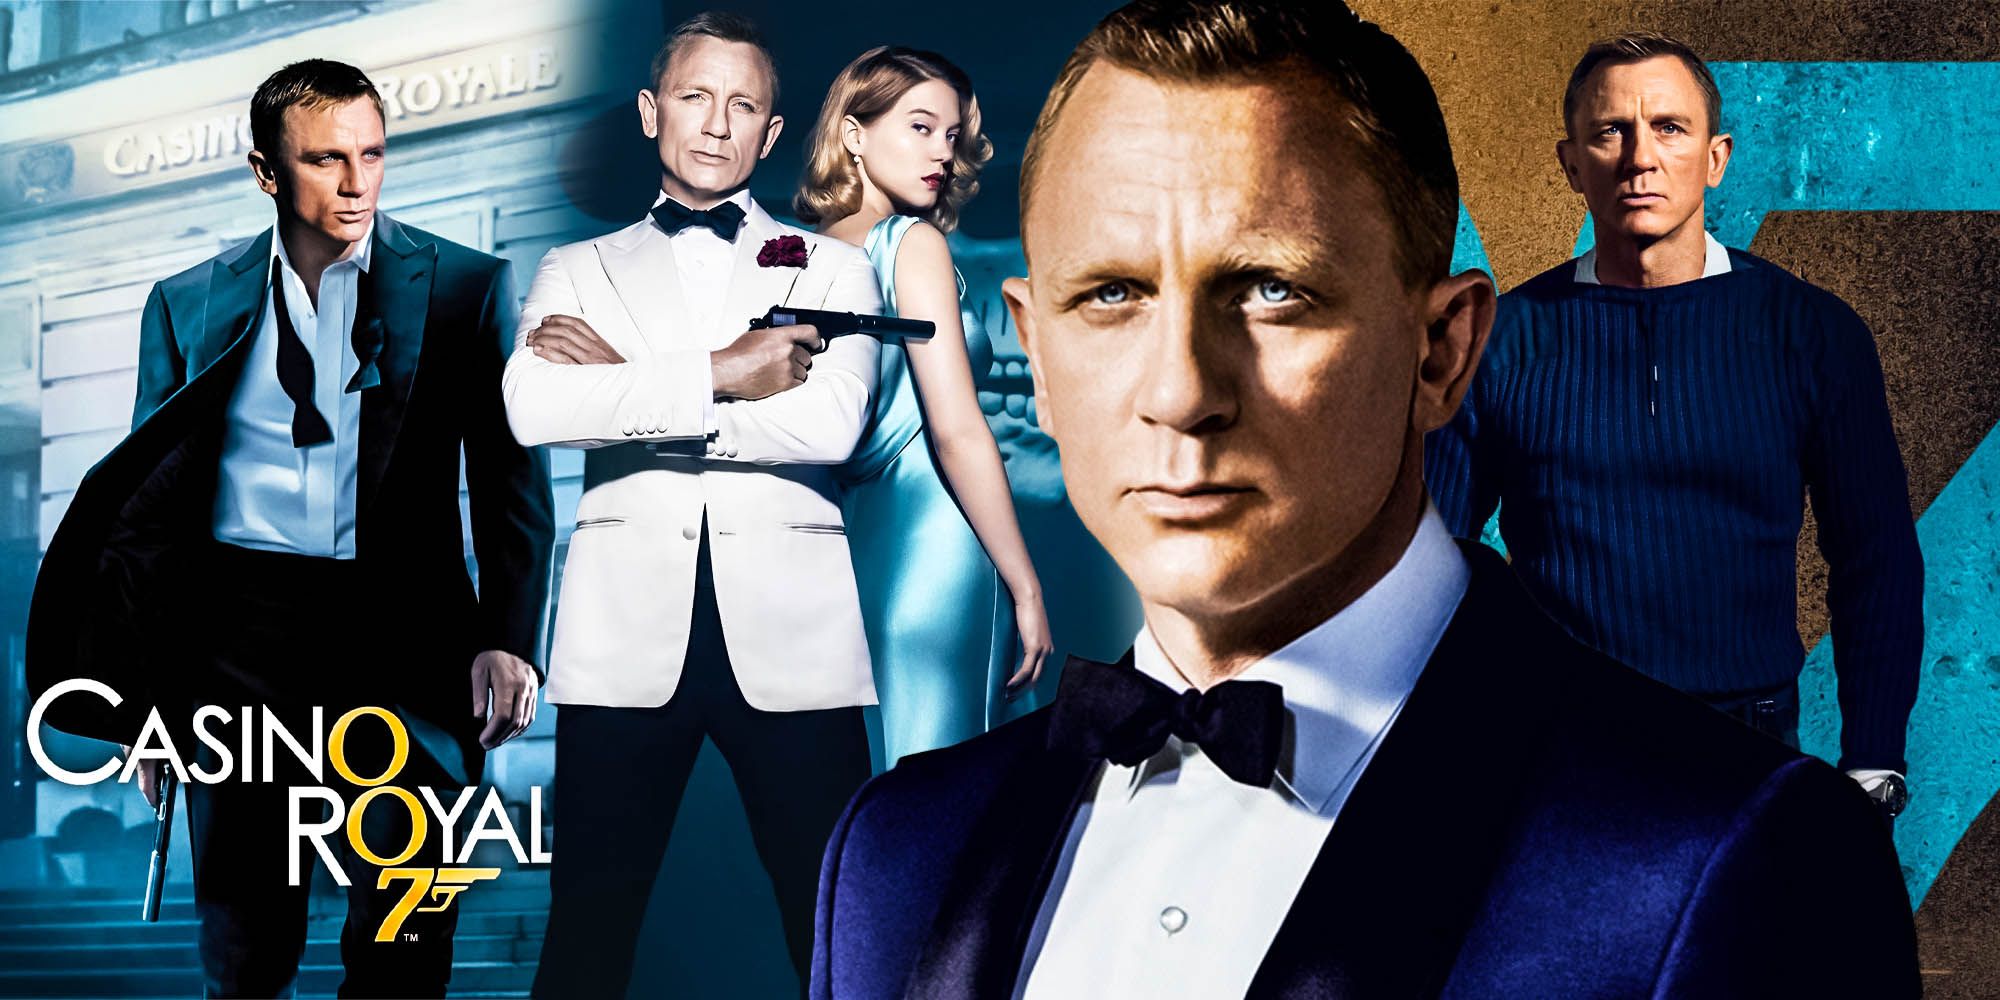 Daniel Craig bond movies ranked best to worst Casino royale spectre skyfall no time to die